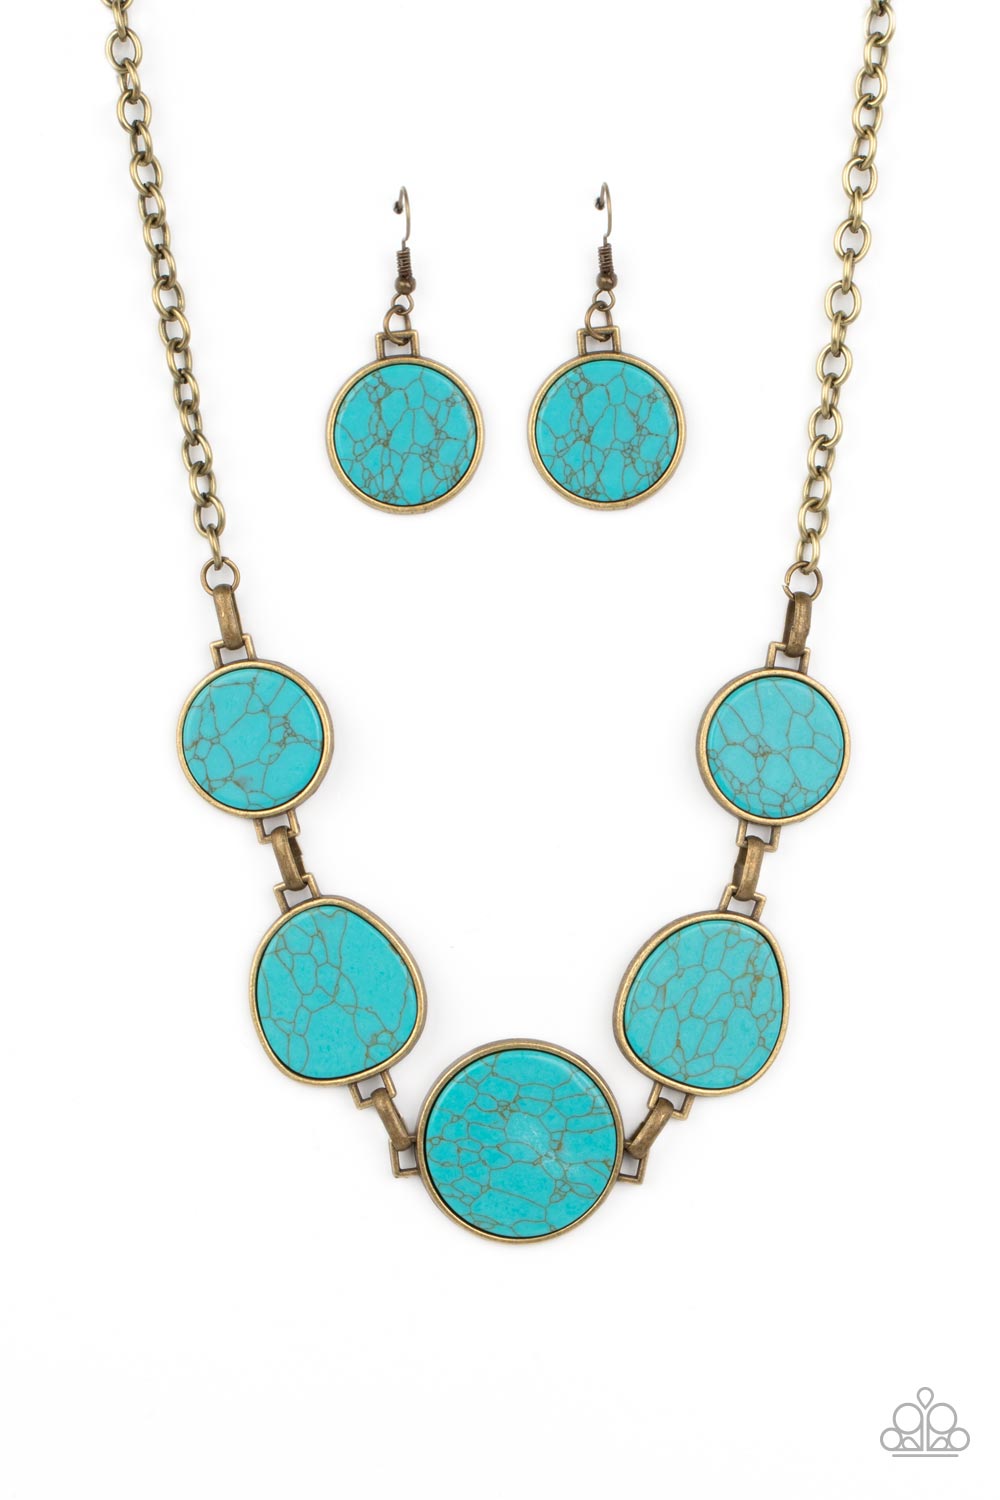 Santa Fe Flats - Brass and Turquoise Necklace - Paparazzi Accessories Bejeweled Accessories By Kristie - Trendy fashion jewelry for everyone -